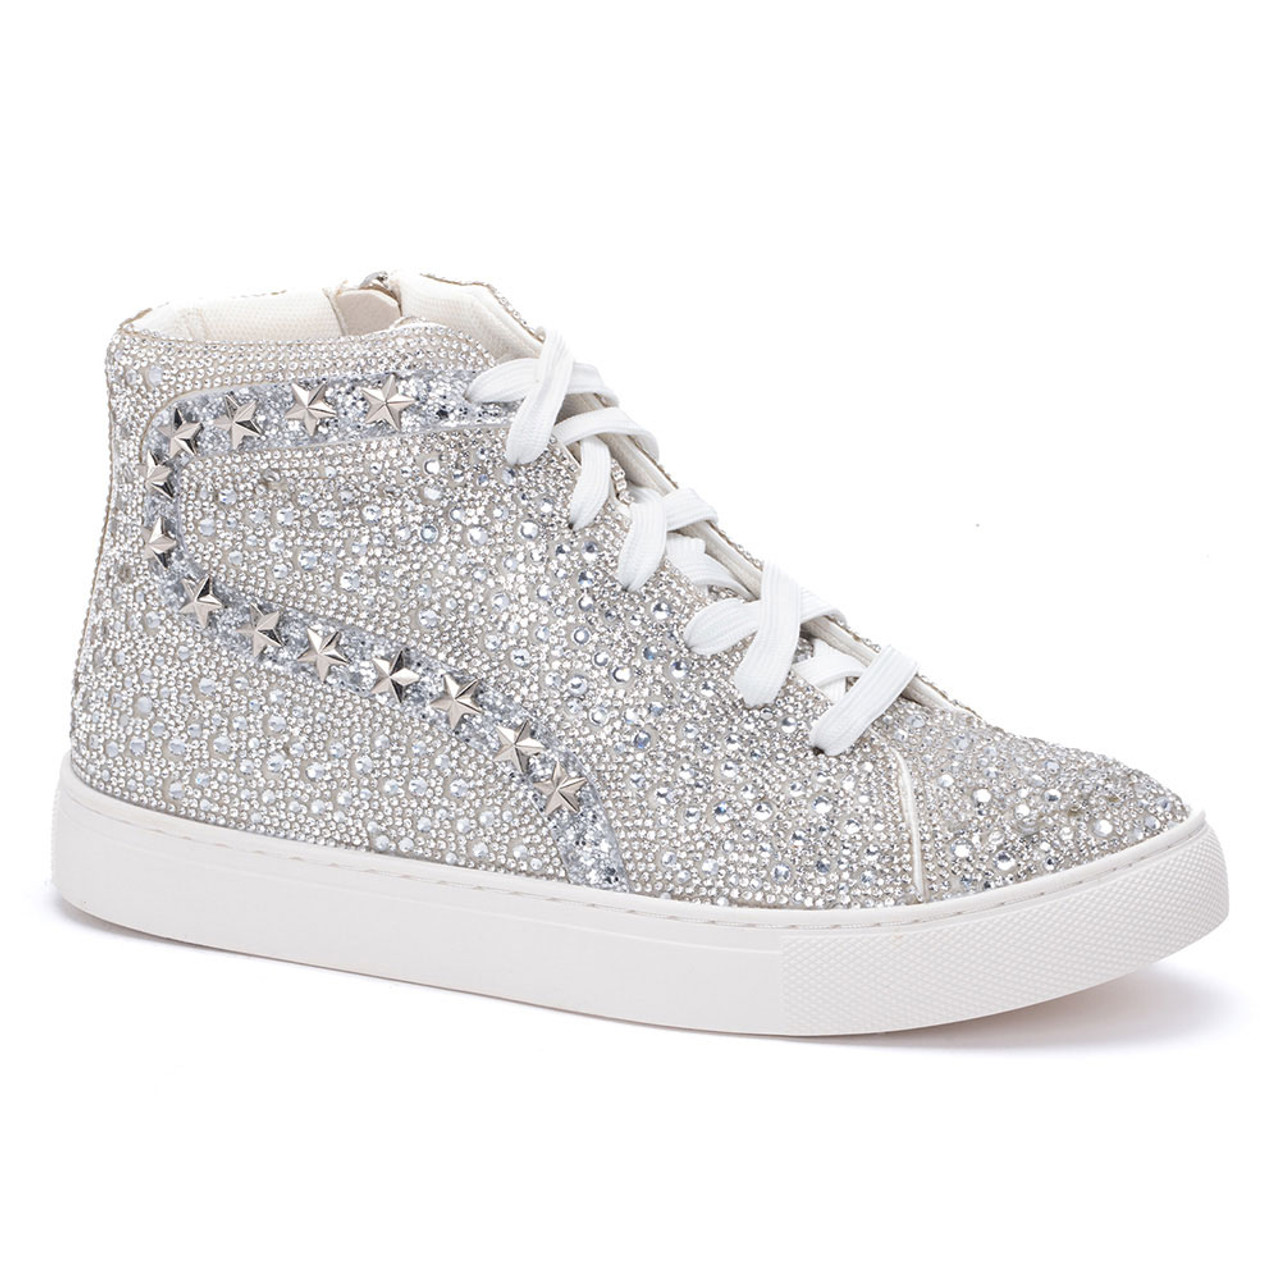 New Luxury Fashion Men Showy Rhinestone Designer High Tops Sneakers Casual  Shoes